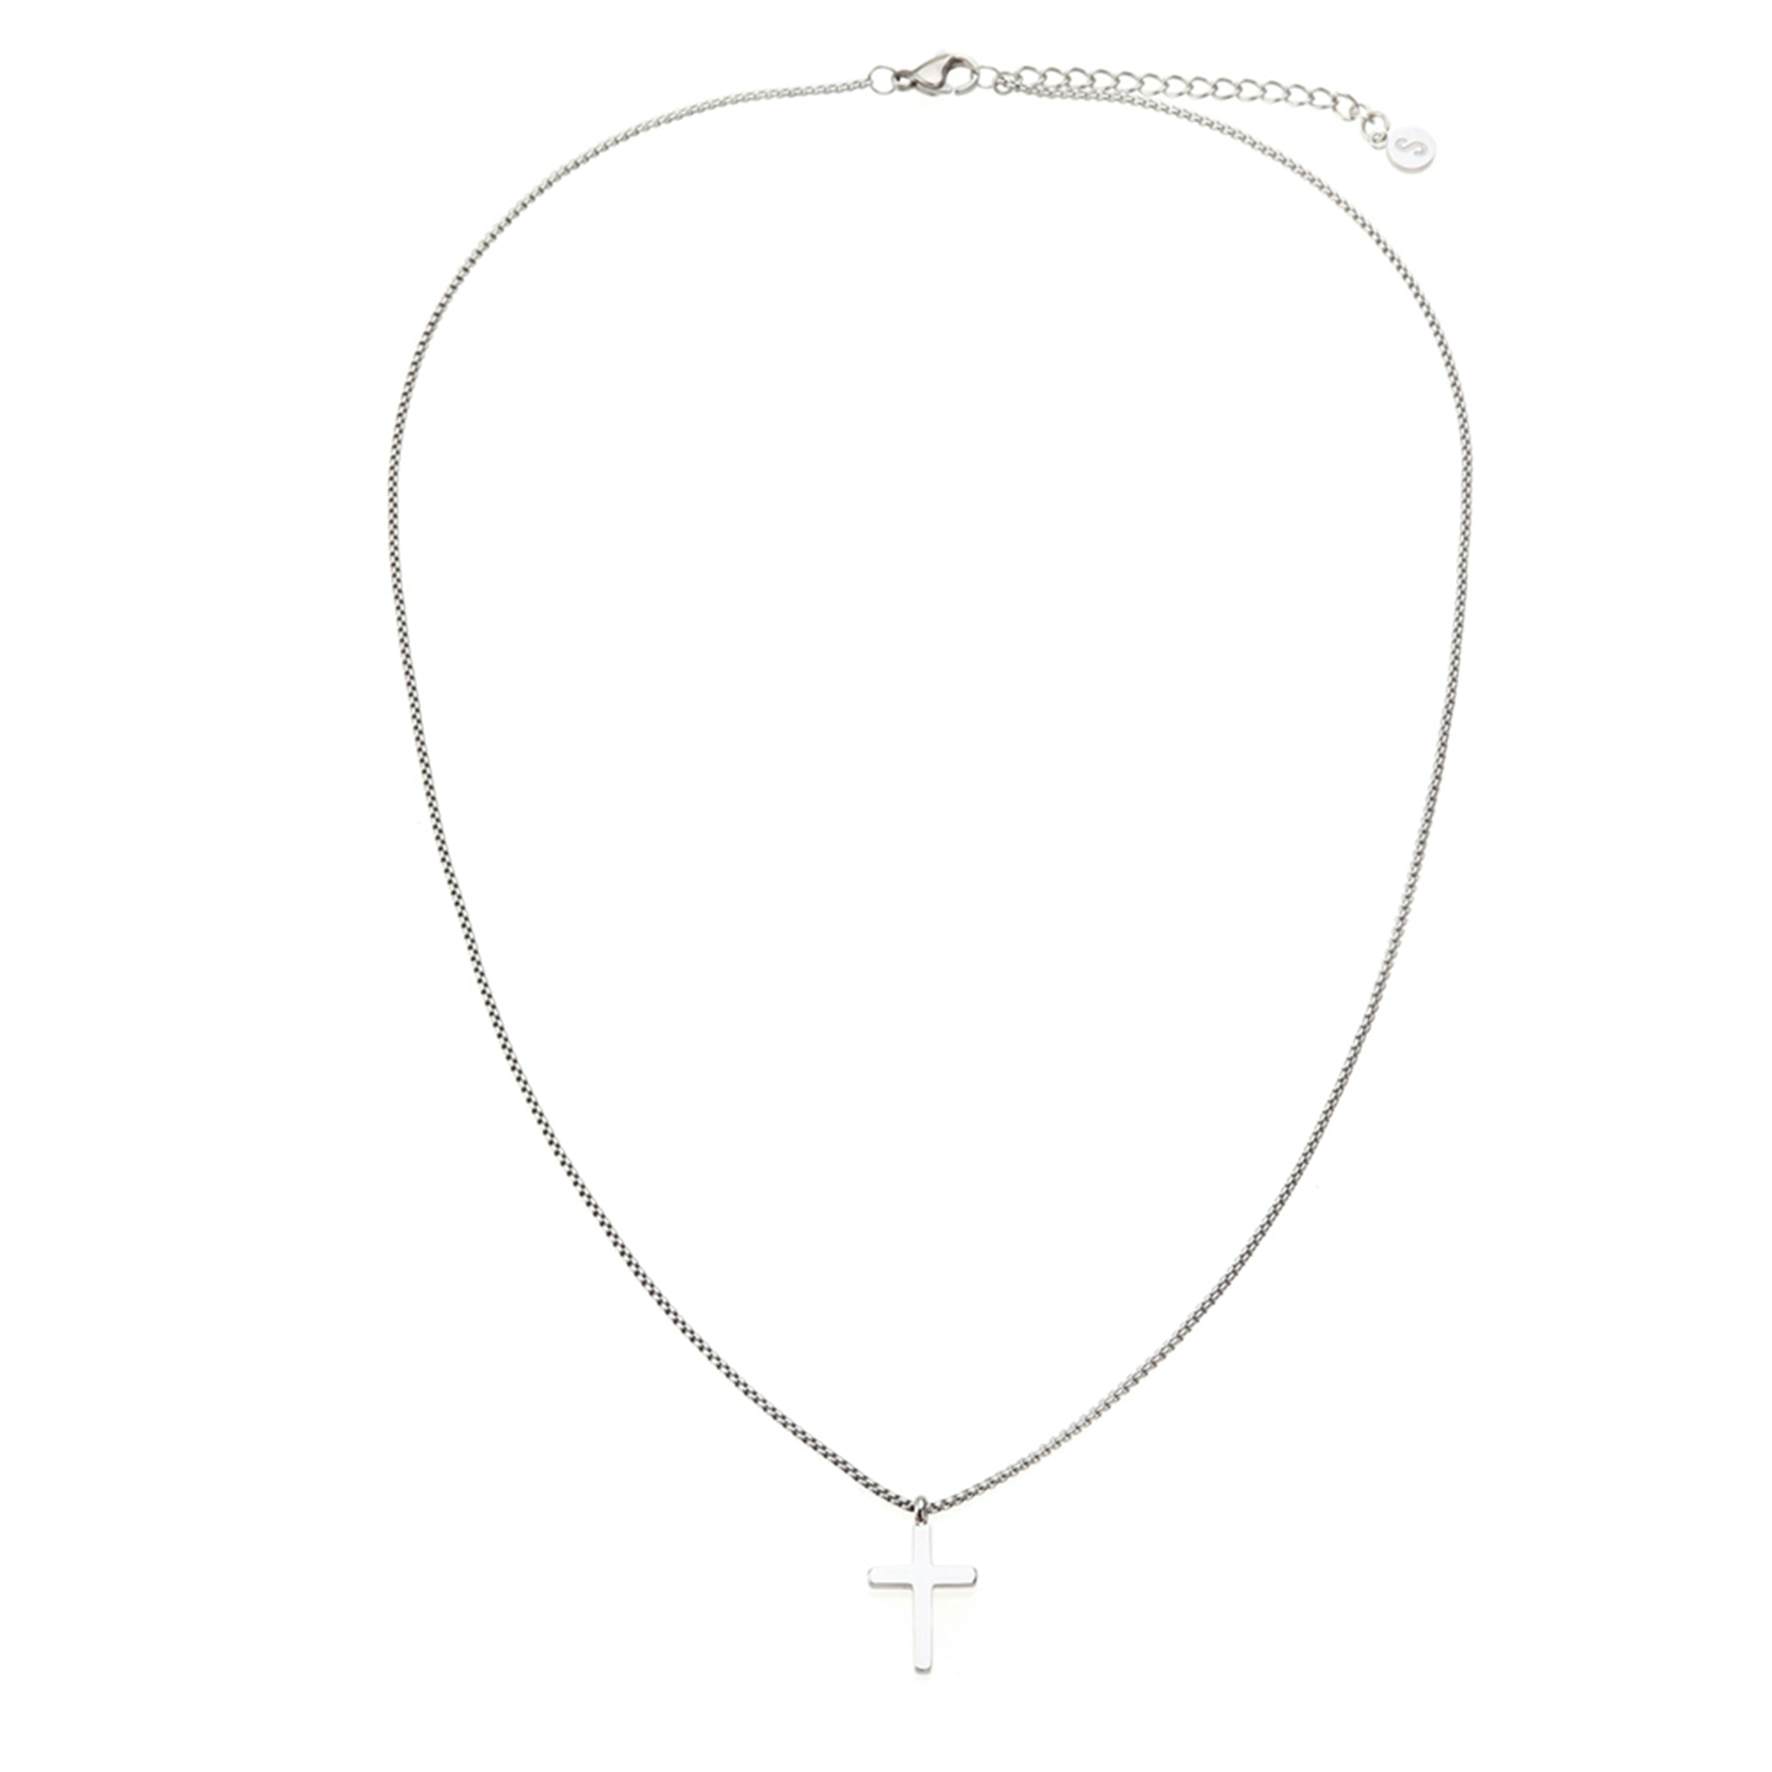 Cross Necklace Small from SAMIE in Stainless steel